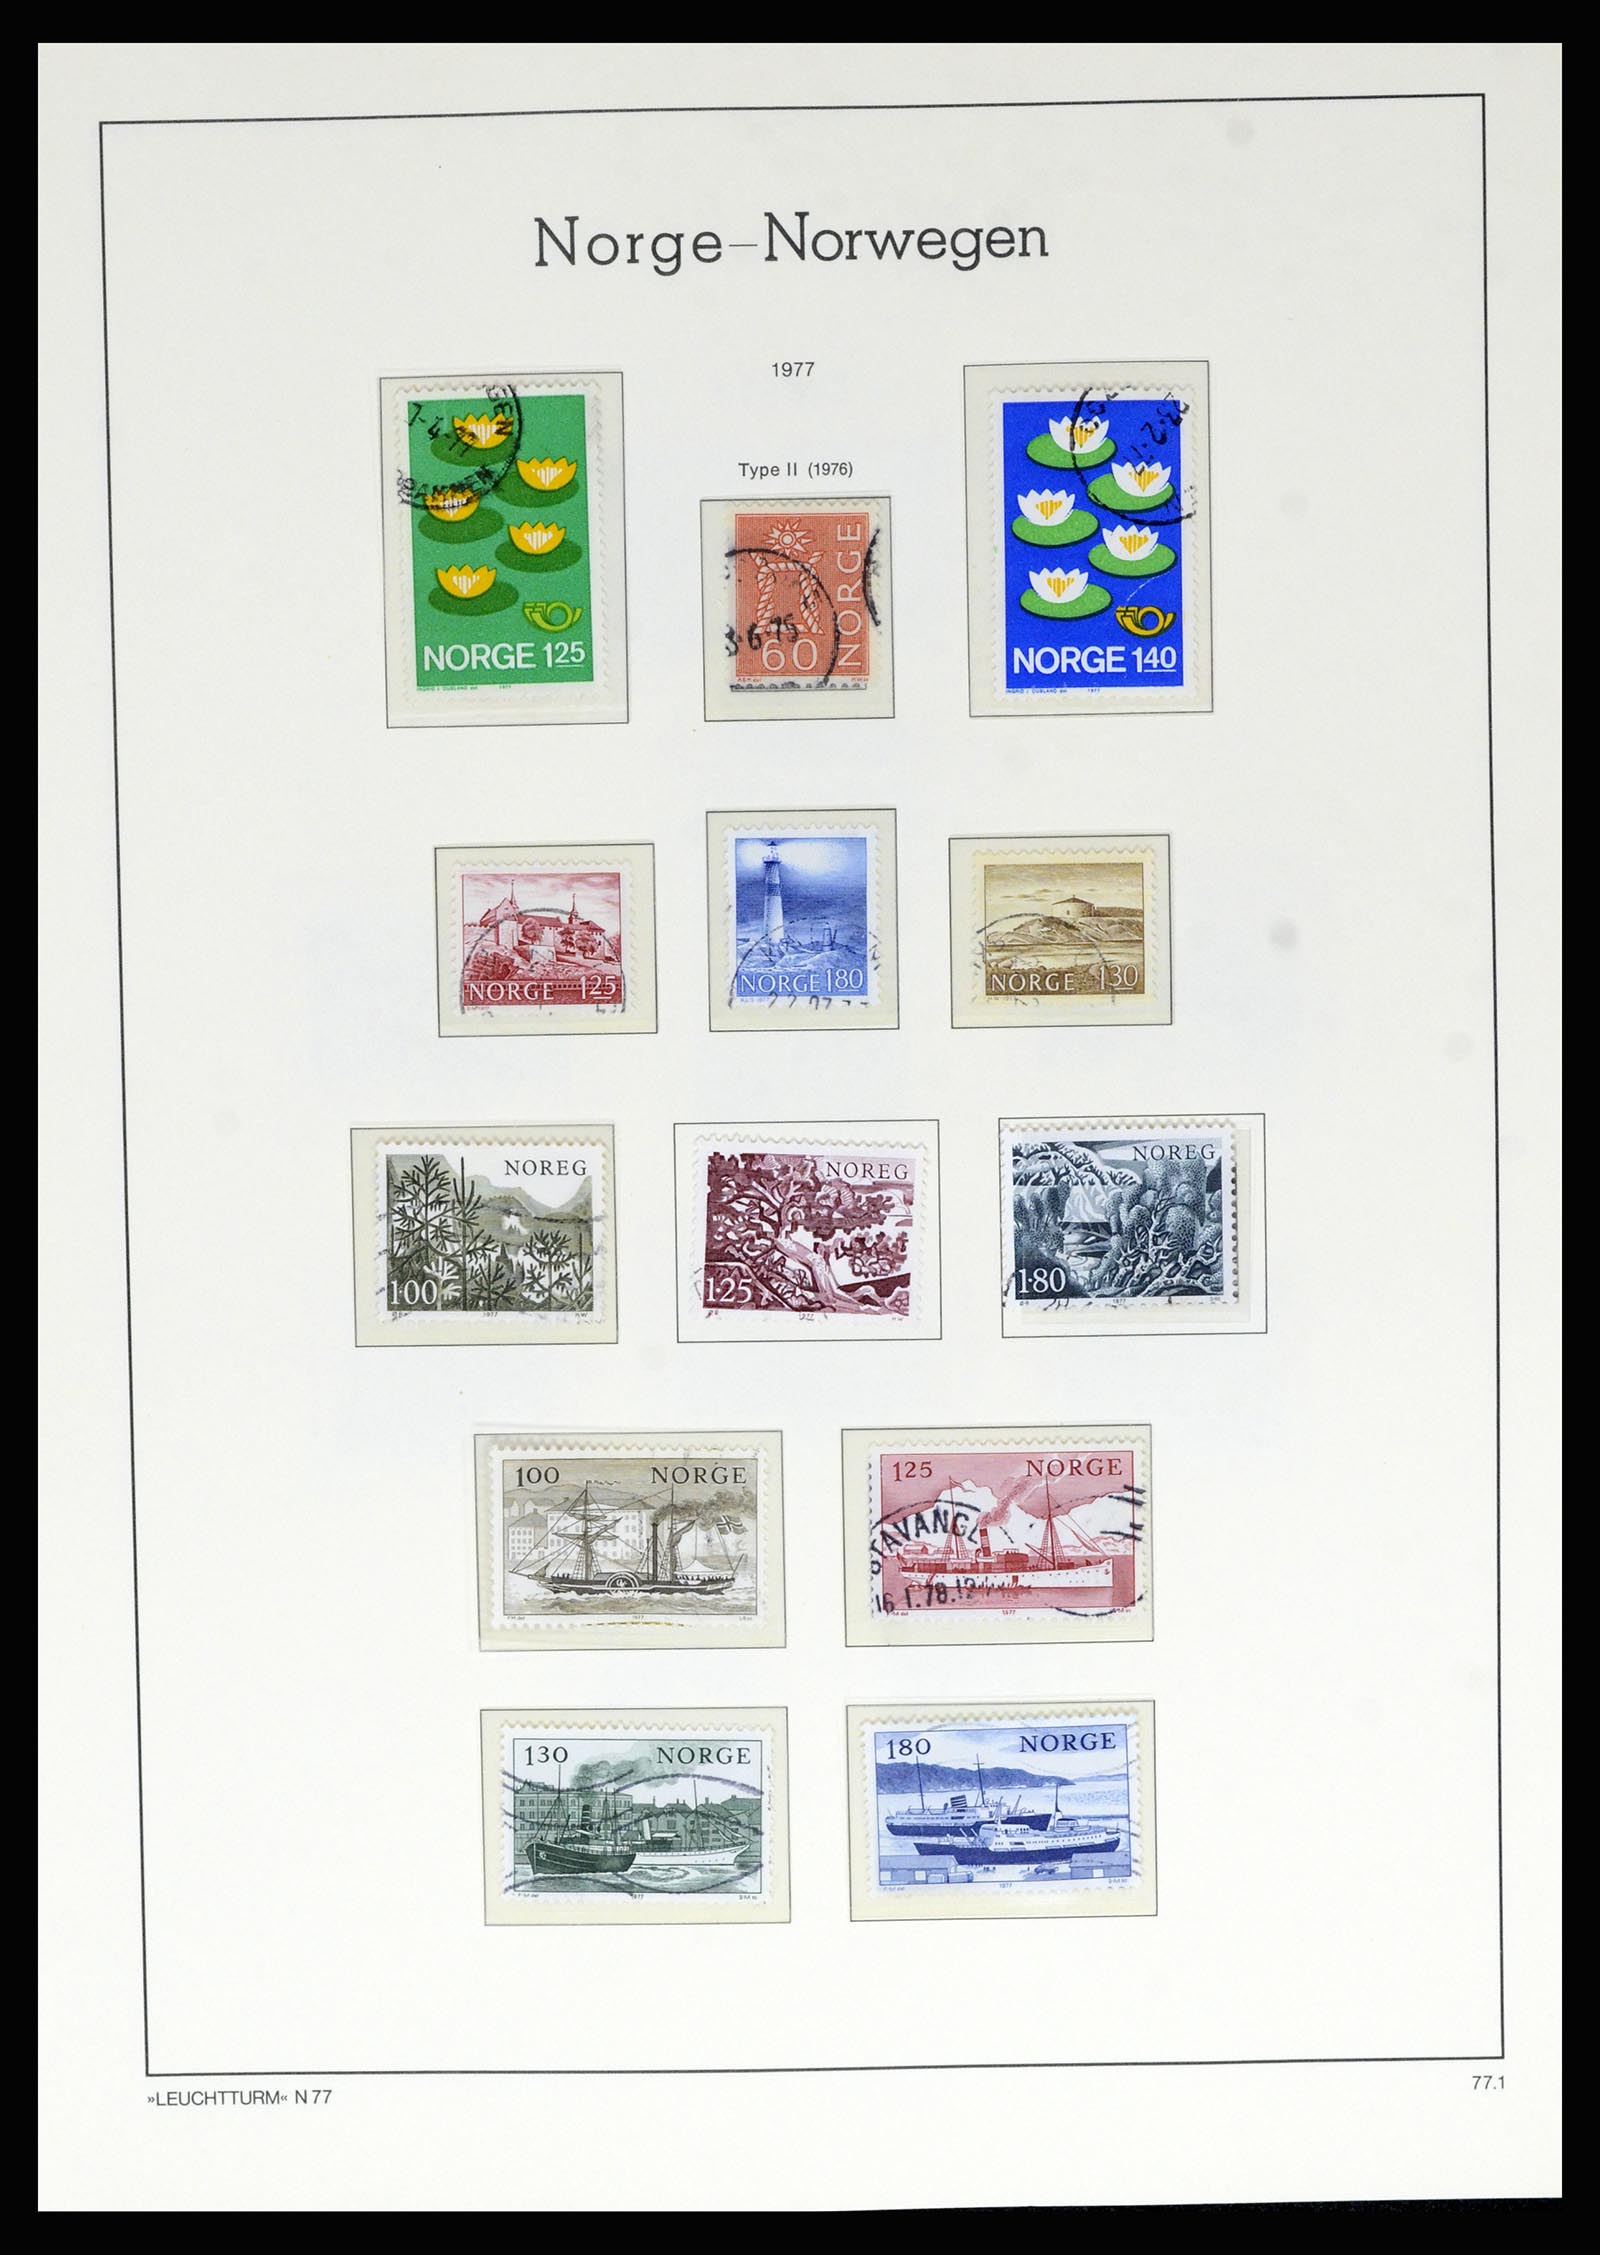 36540 077 - Stamp collection 36540 Norway 1855-2019!